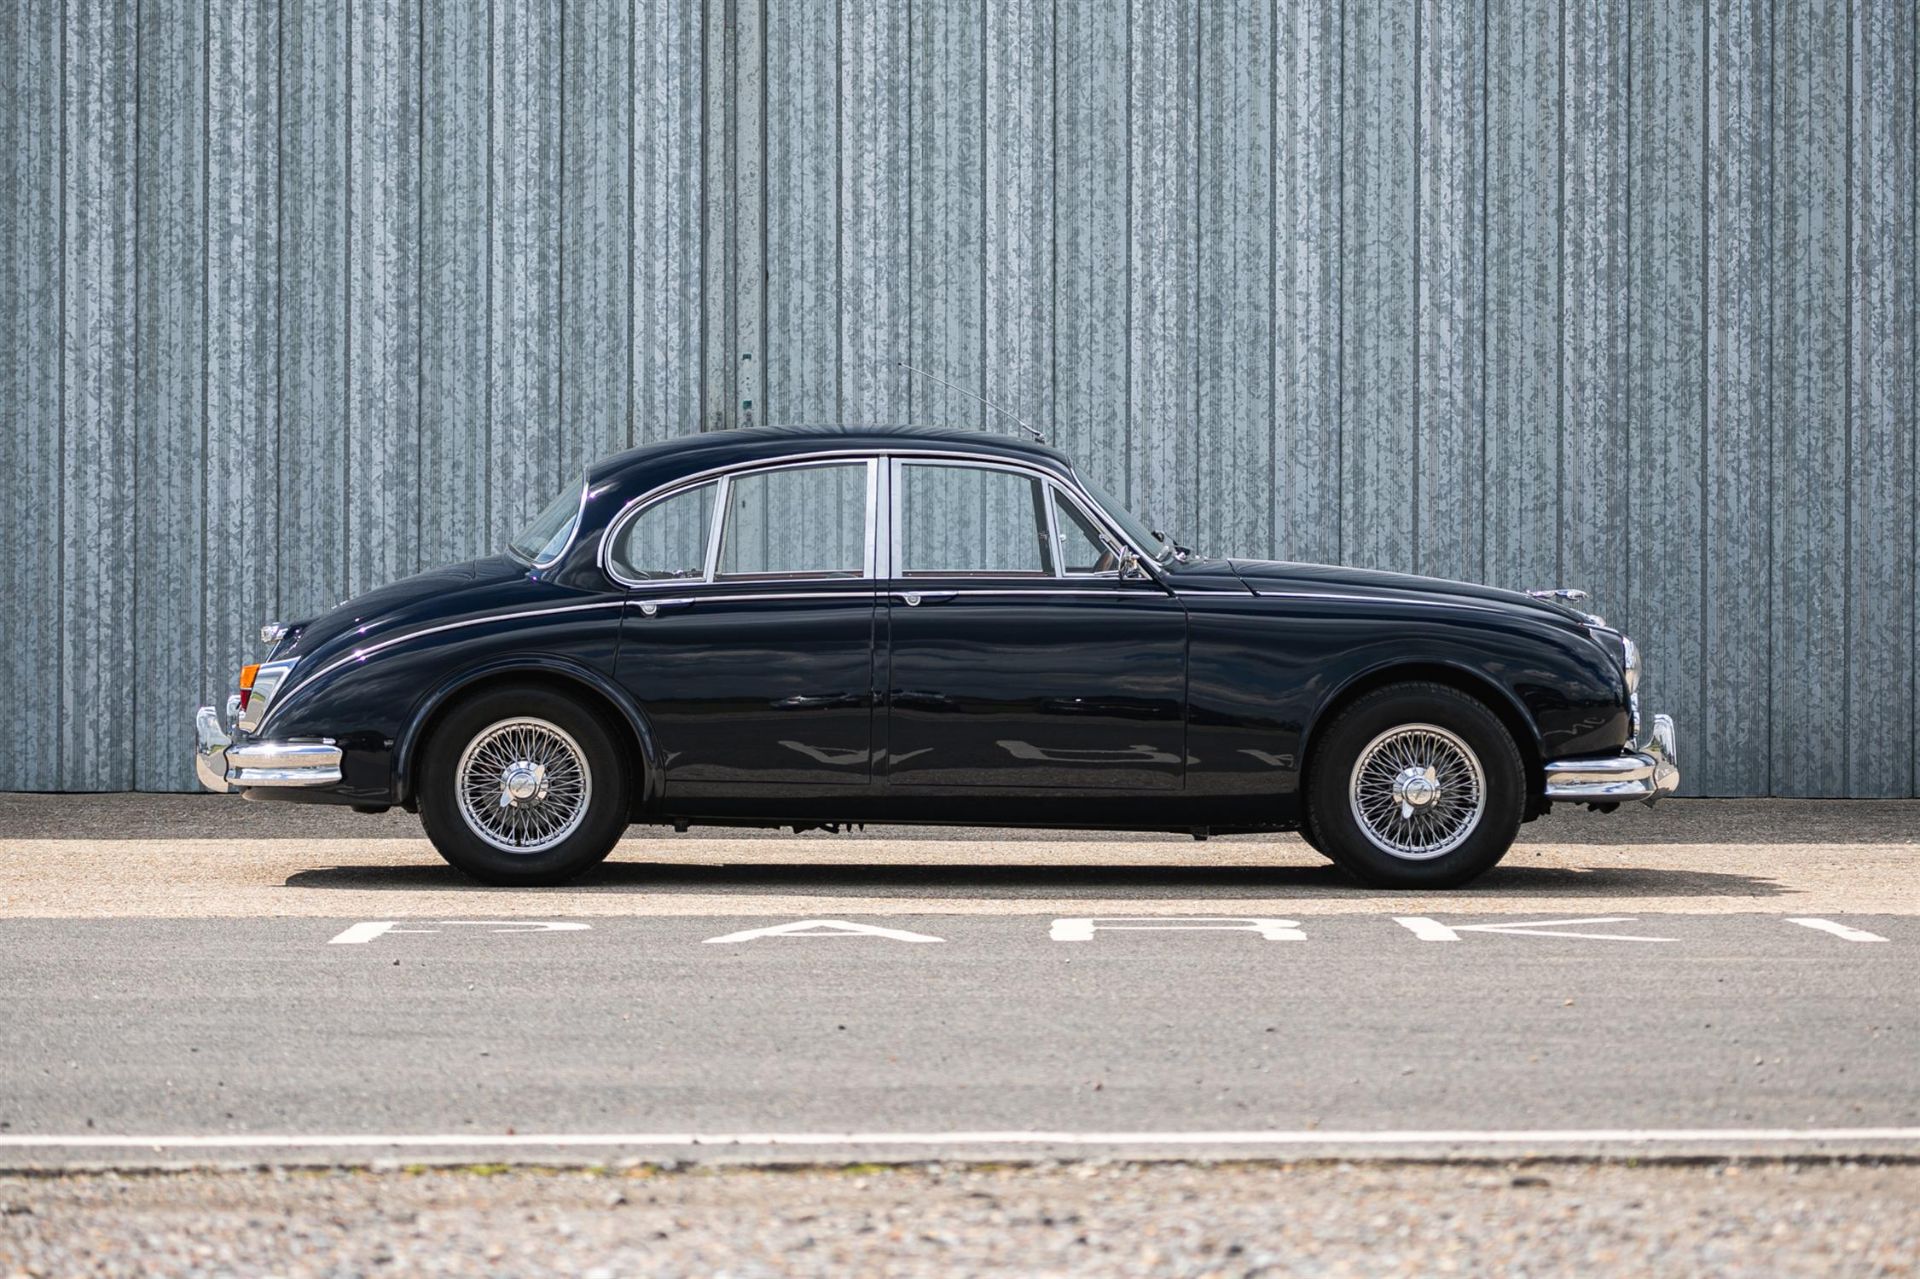 1964 Jaguar Mk2 3.8-Litre 'Coombs'-Style Sports Saloon - Image 5 of 10